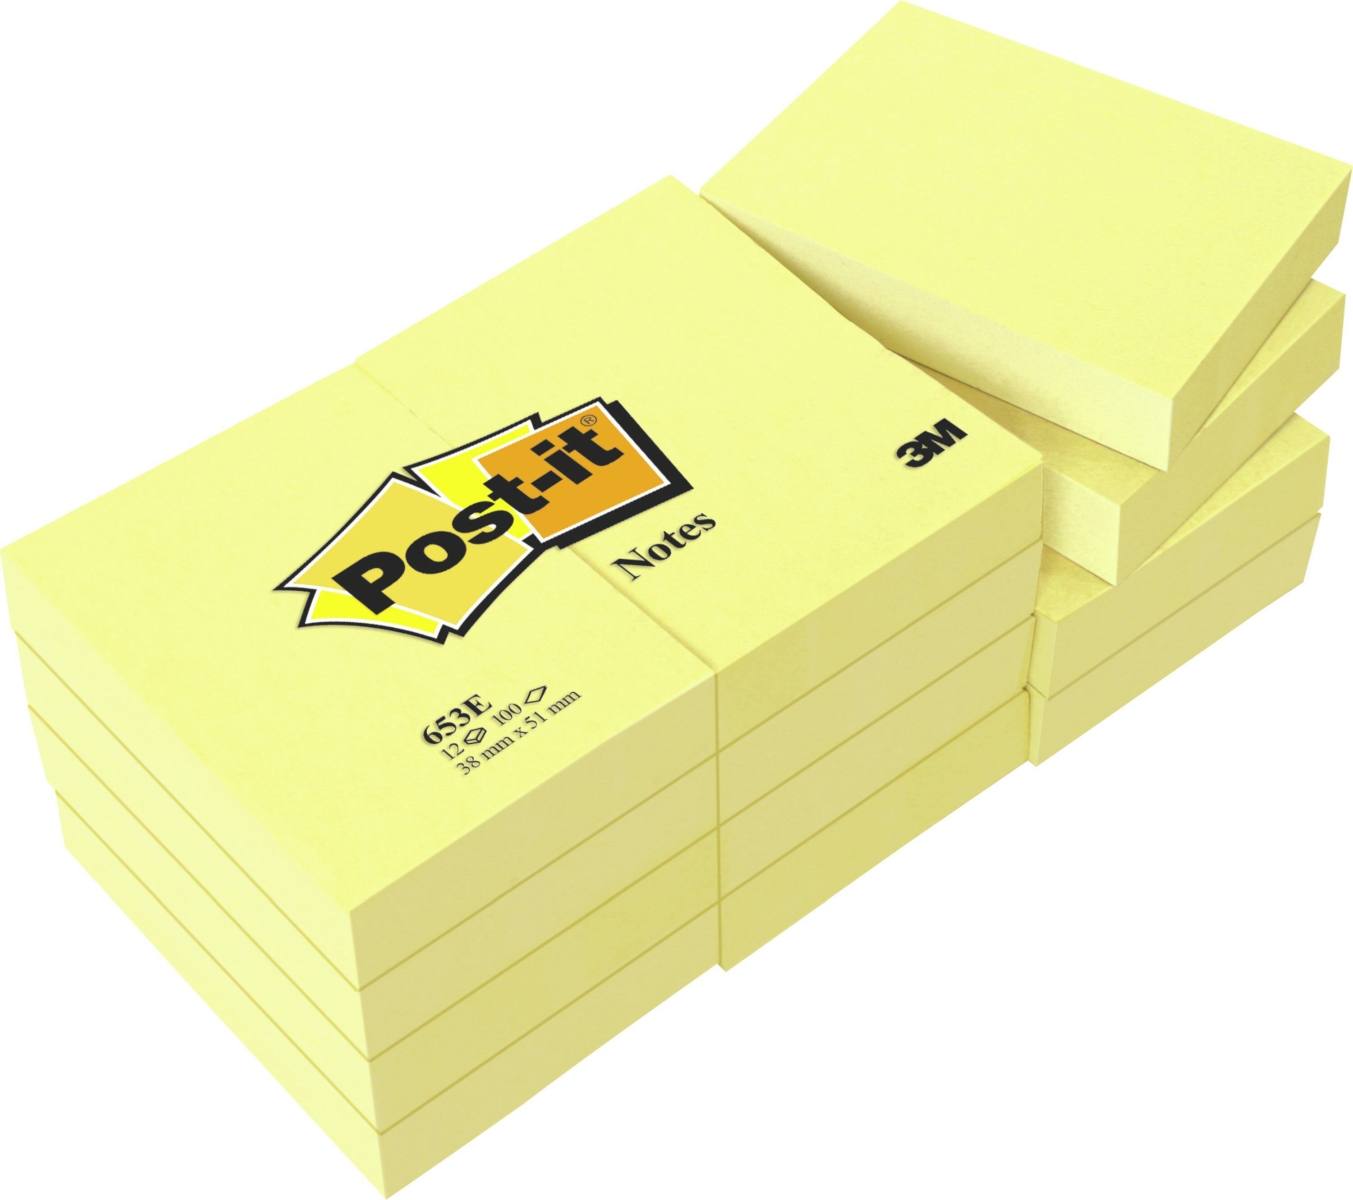 3M Post-it Notes 653E, 51 mm x 38 mm, yellow, 12 pads of 100 sheets each